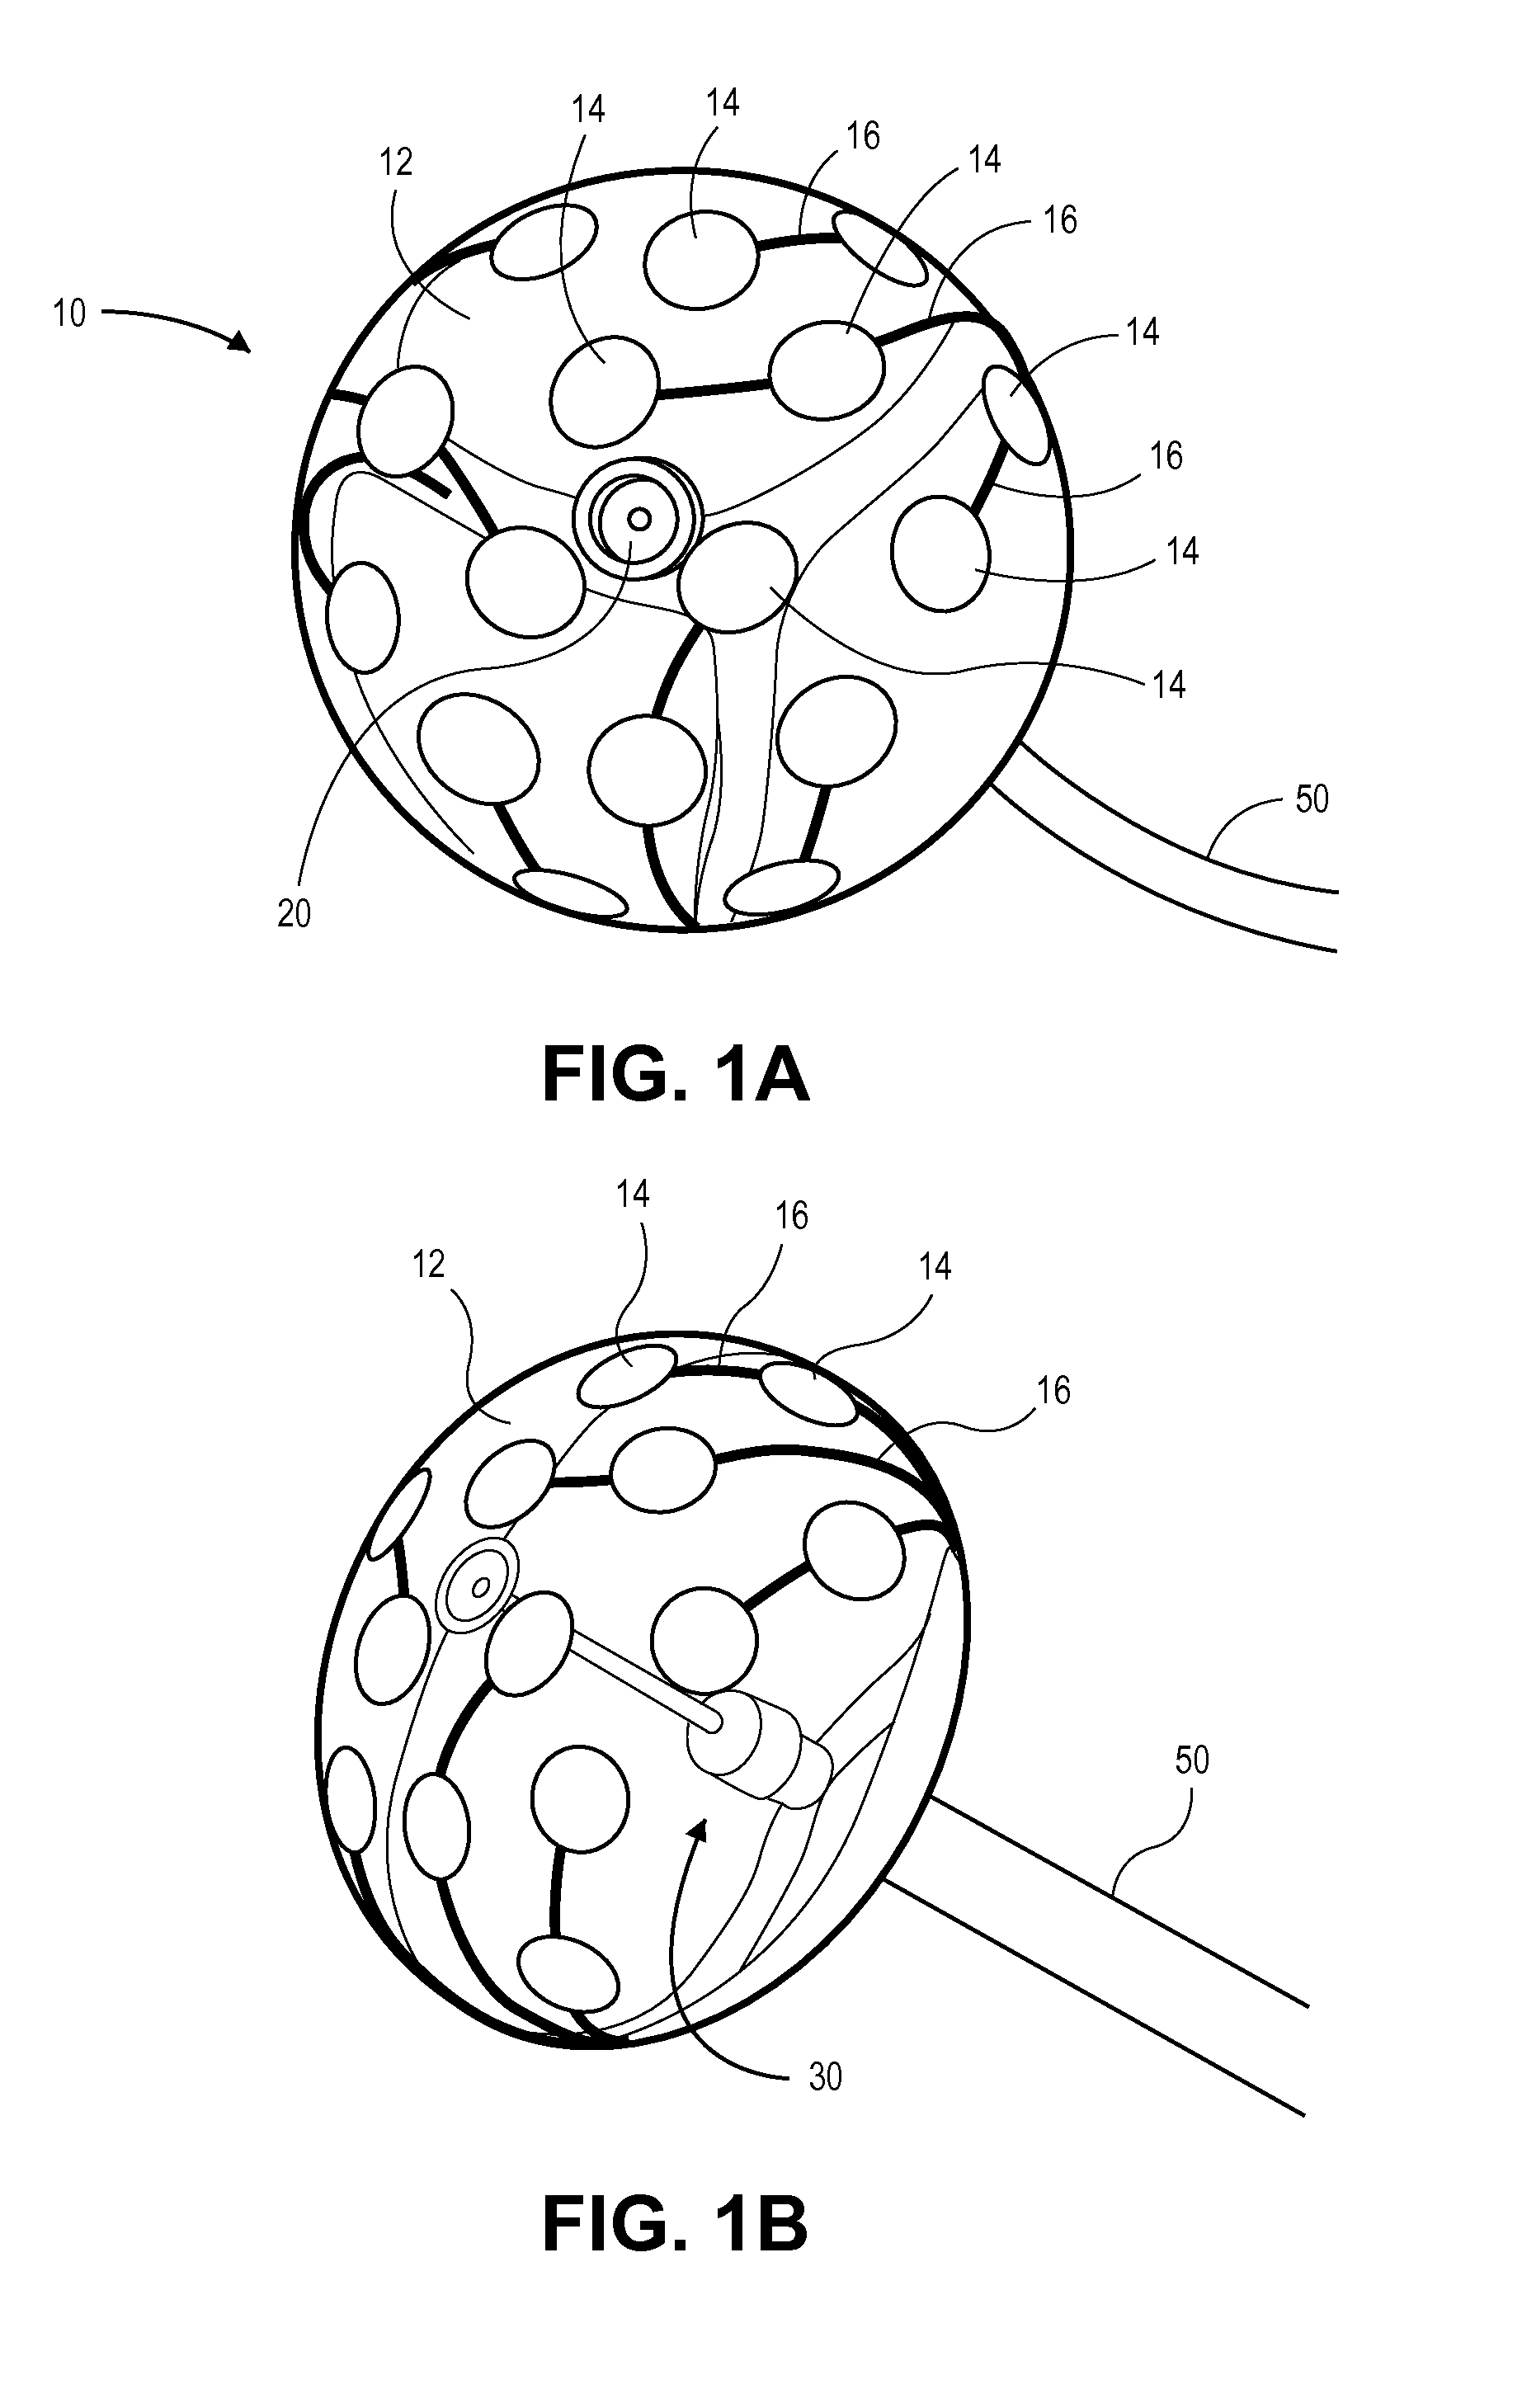 Cardiac ablation catheters and methods of use thereof